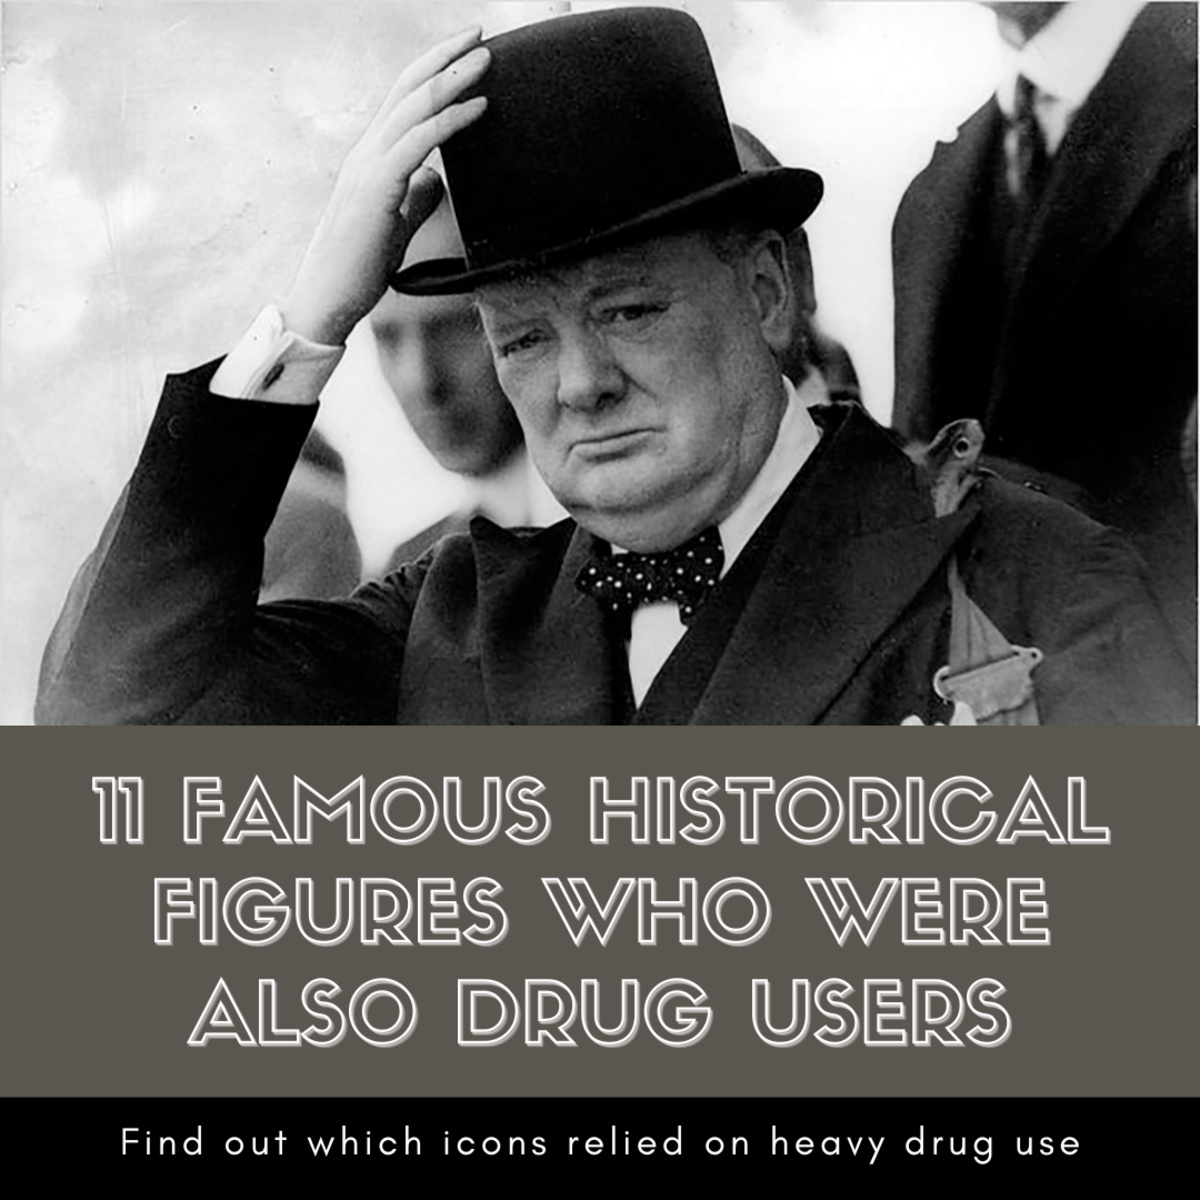 This article will take a look 11 famous icons from history who were also heavy drug users.